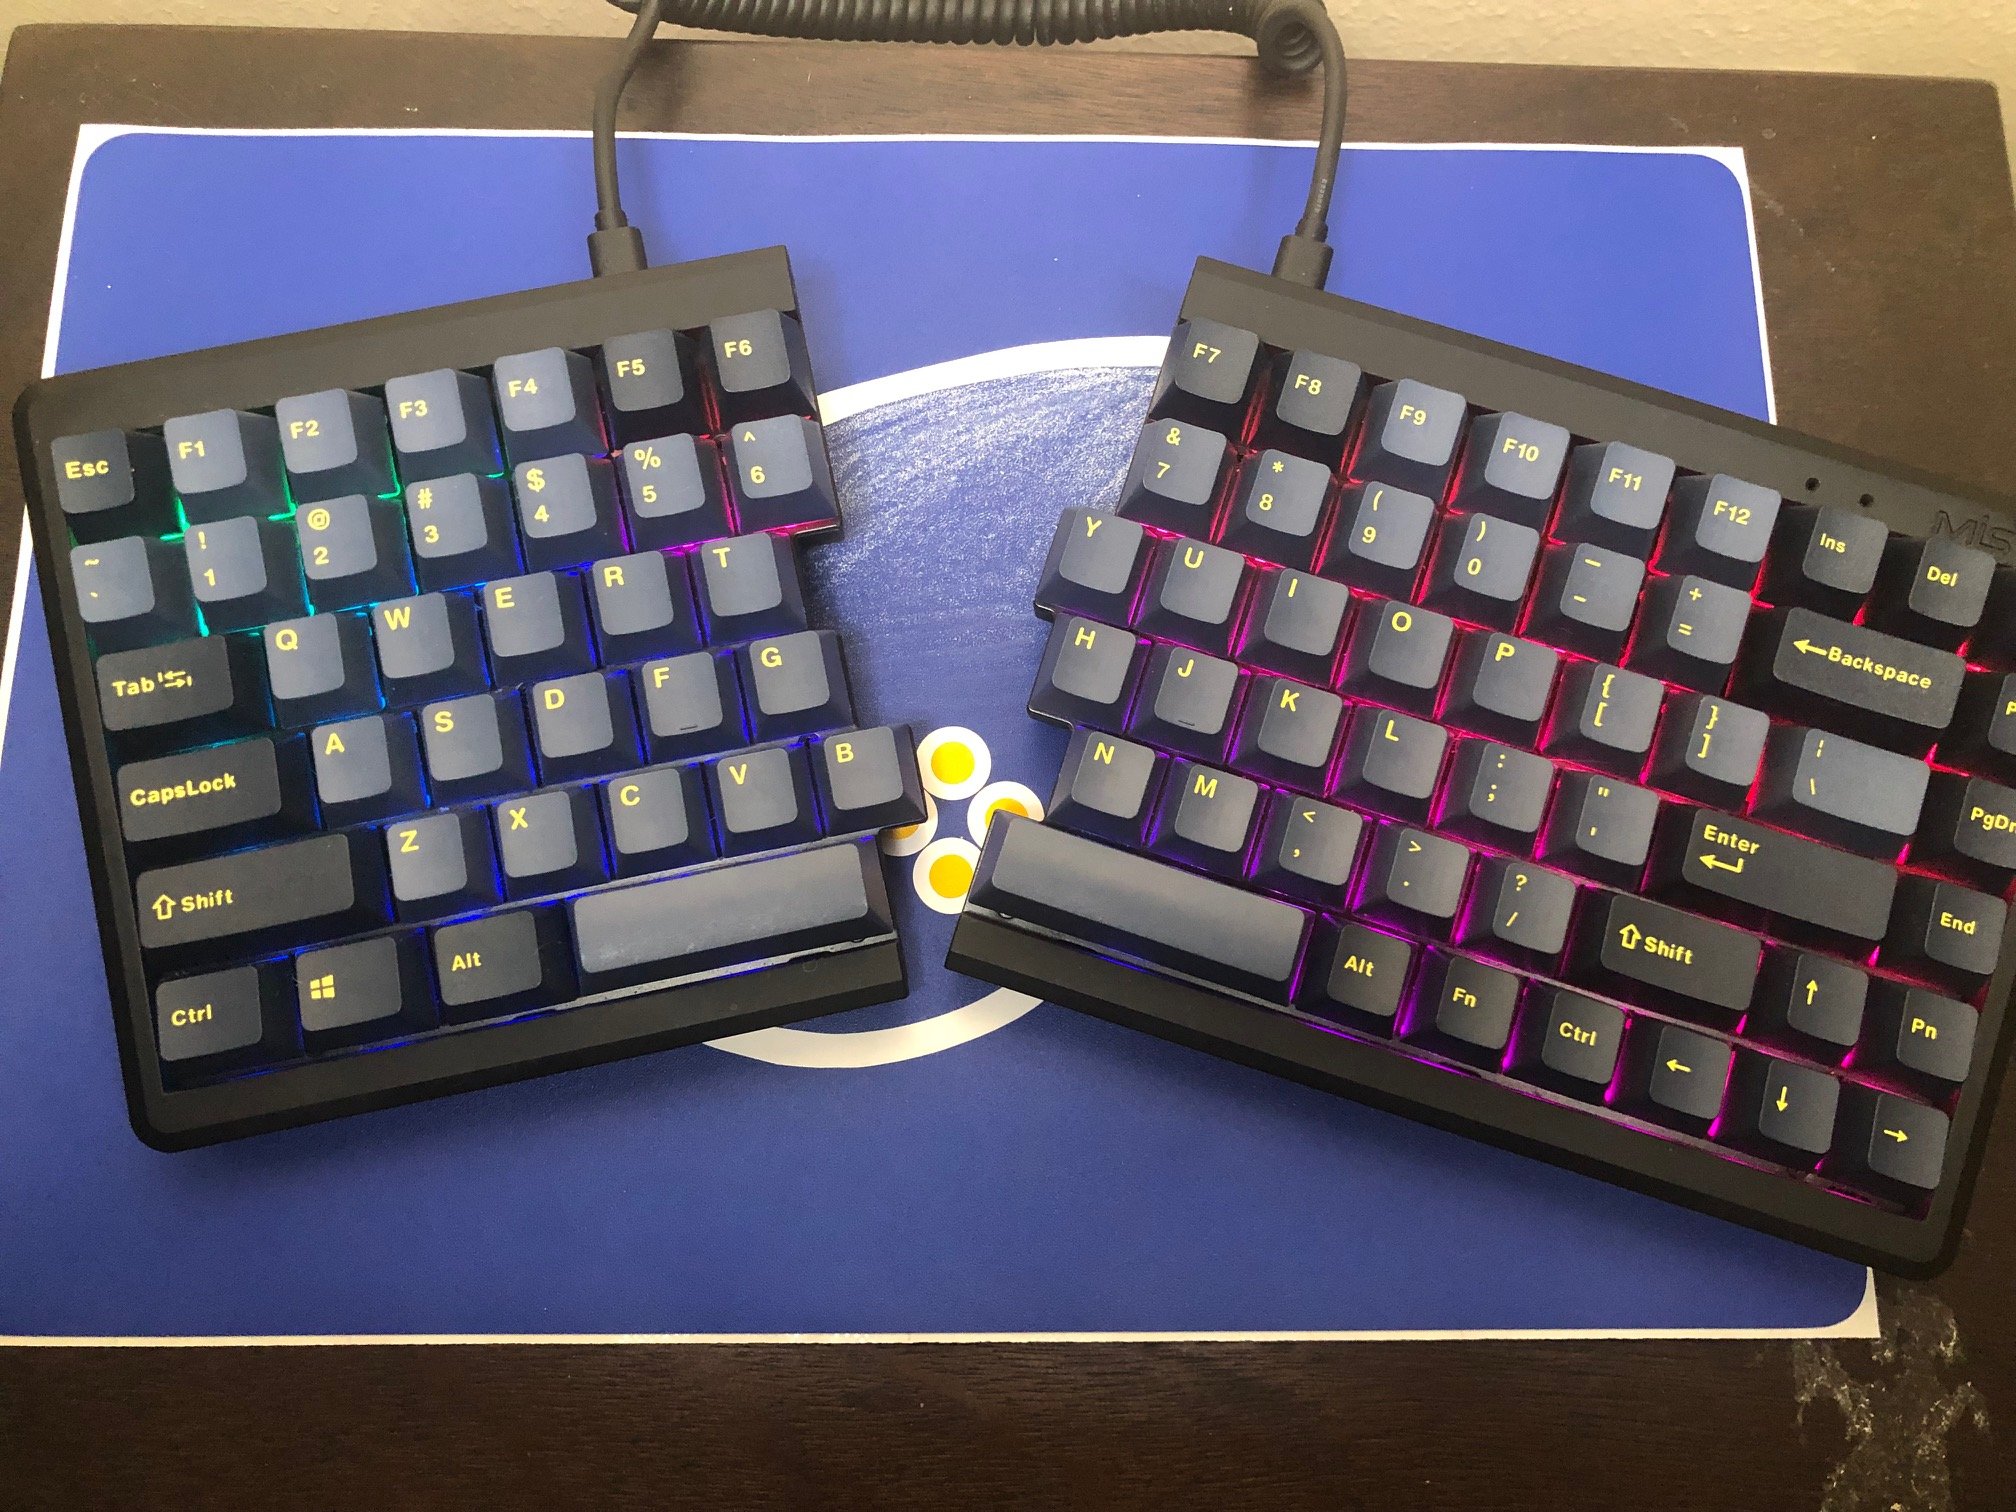 Mistel Barocco MD770 RGB BT Keyboard Review (Hardware) - Official GBAtemp  Review | GBAtemp.net - The Independent Video Game Community